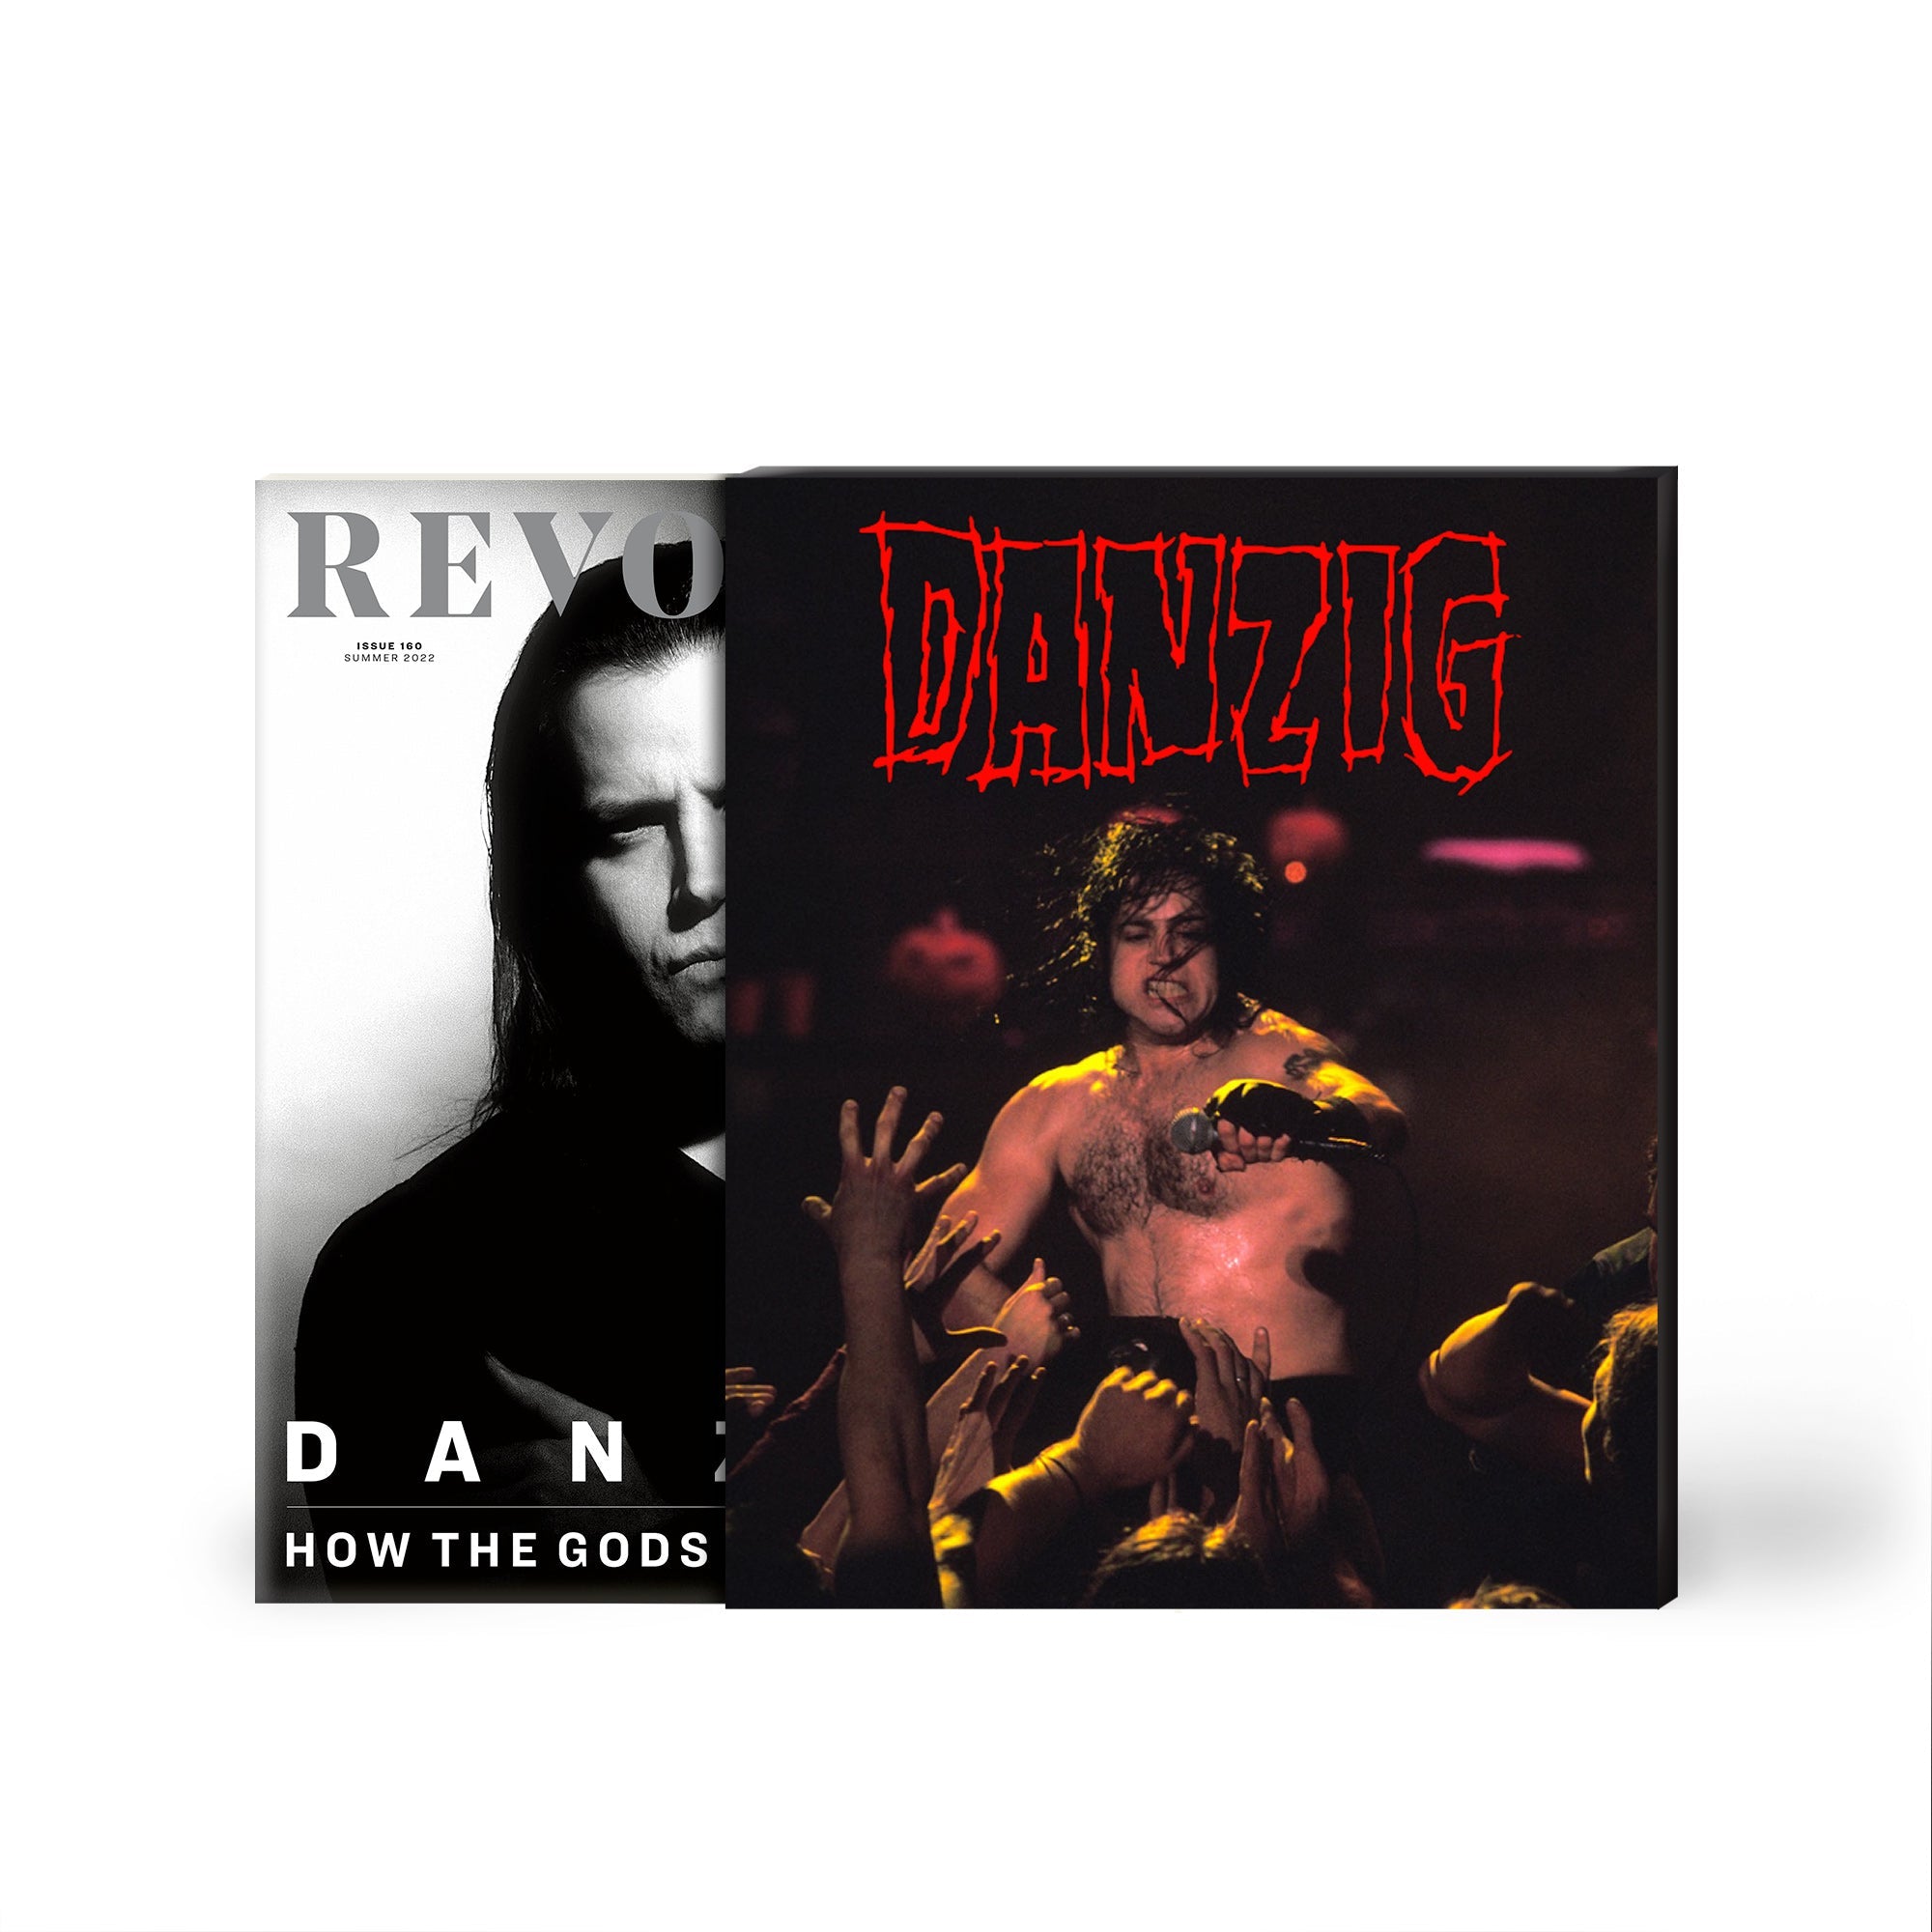 REVOLVER x DANZIG COLLECTOR'S BUNDLE HAND-NUMBERED SLIPCASE W/ PAUL ROMANO PHOTO PRINT - ONLY 200 AVAILABLE